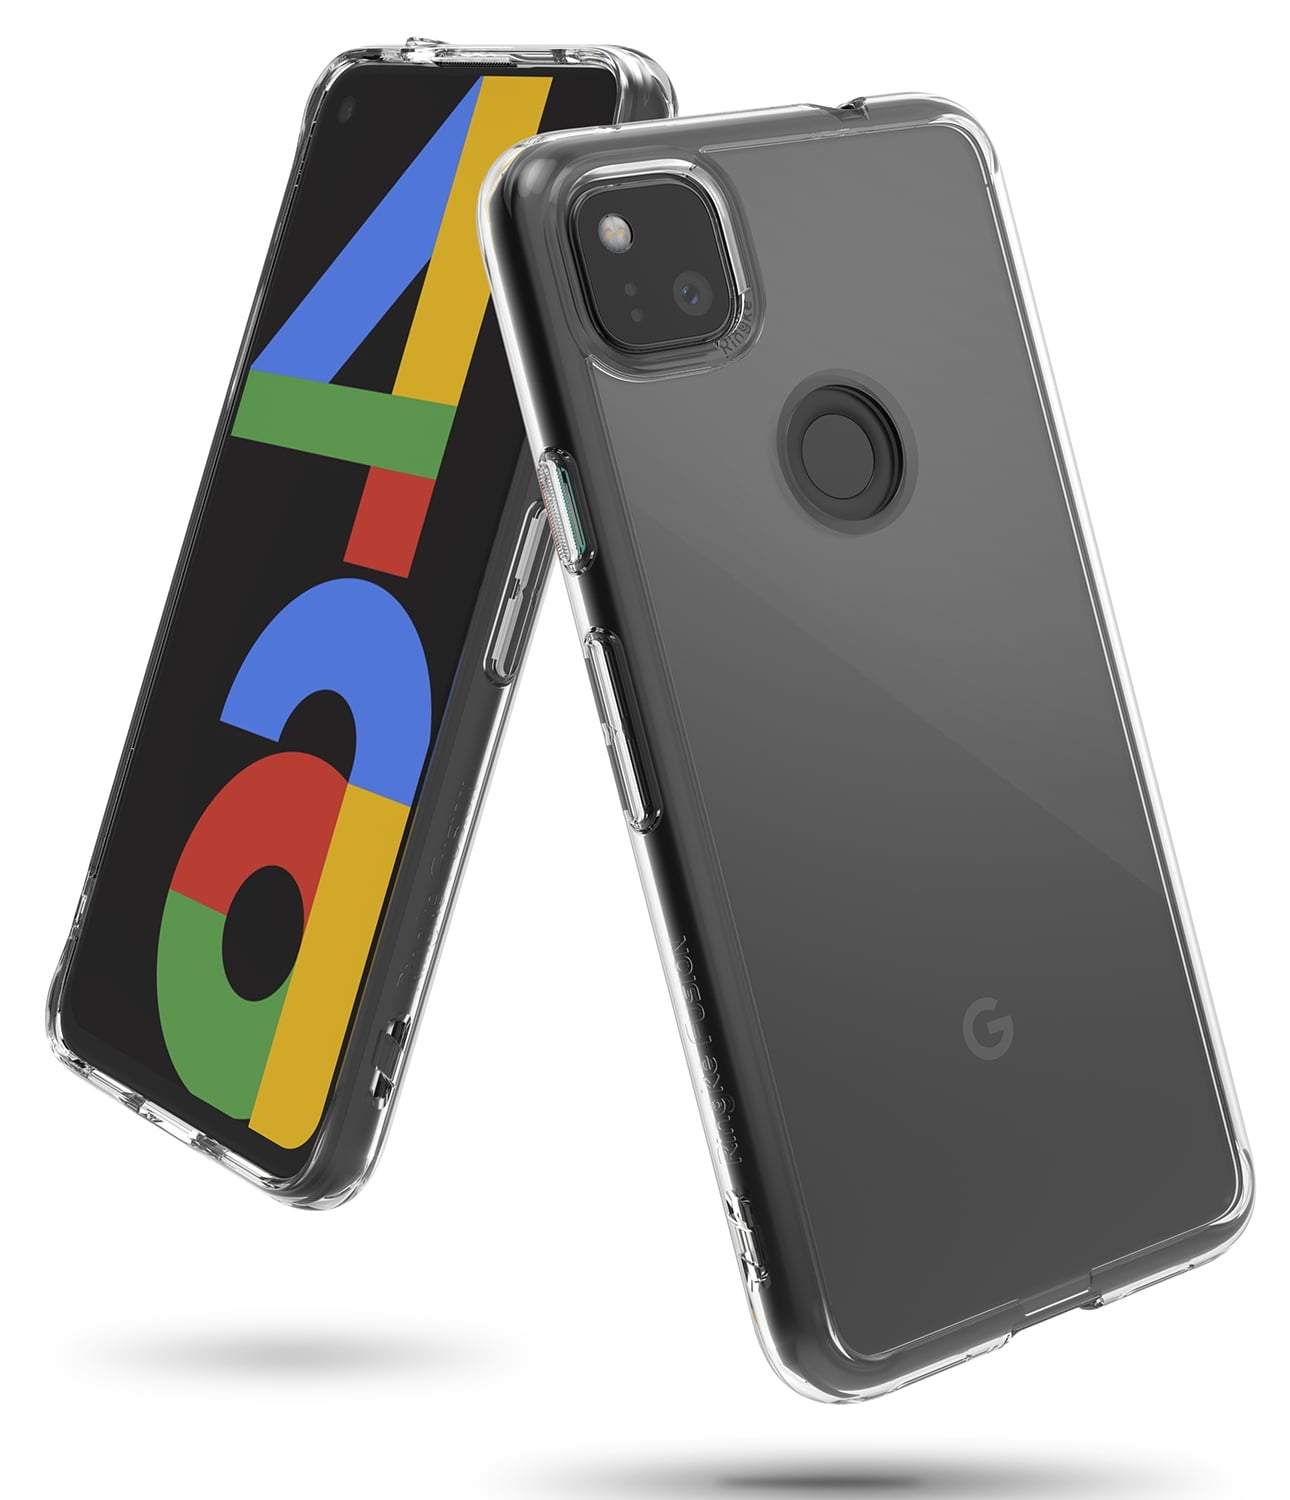 Premium Hard Cover Case for Google pixel 2 XL in Transparent Clear 